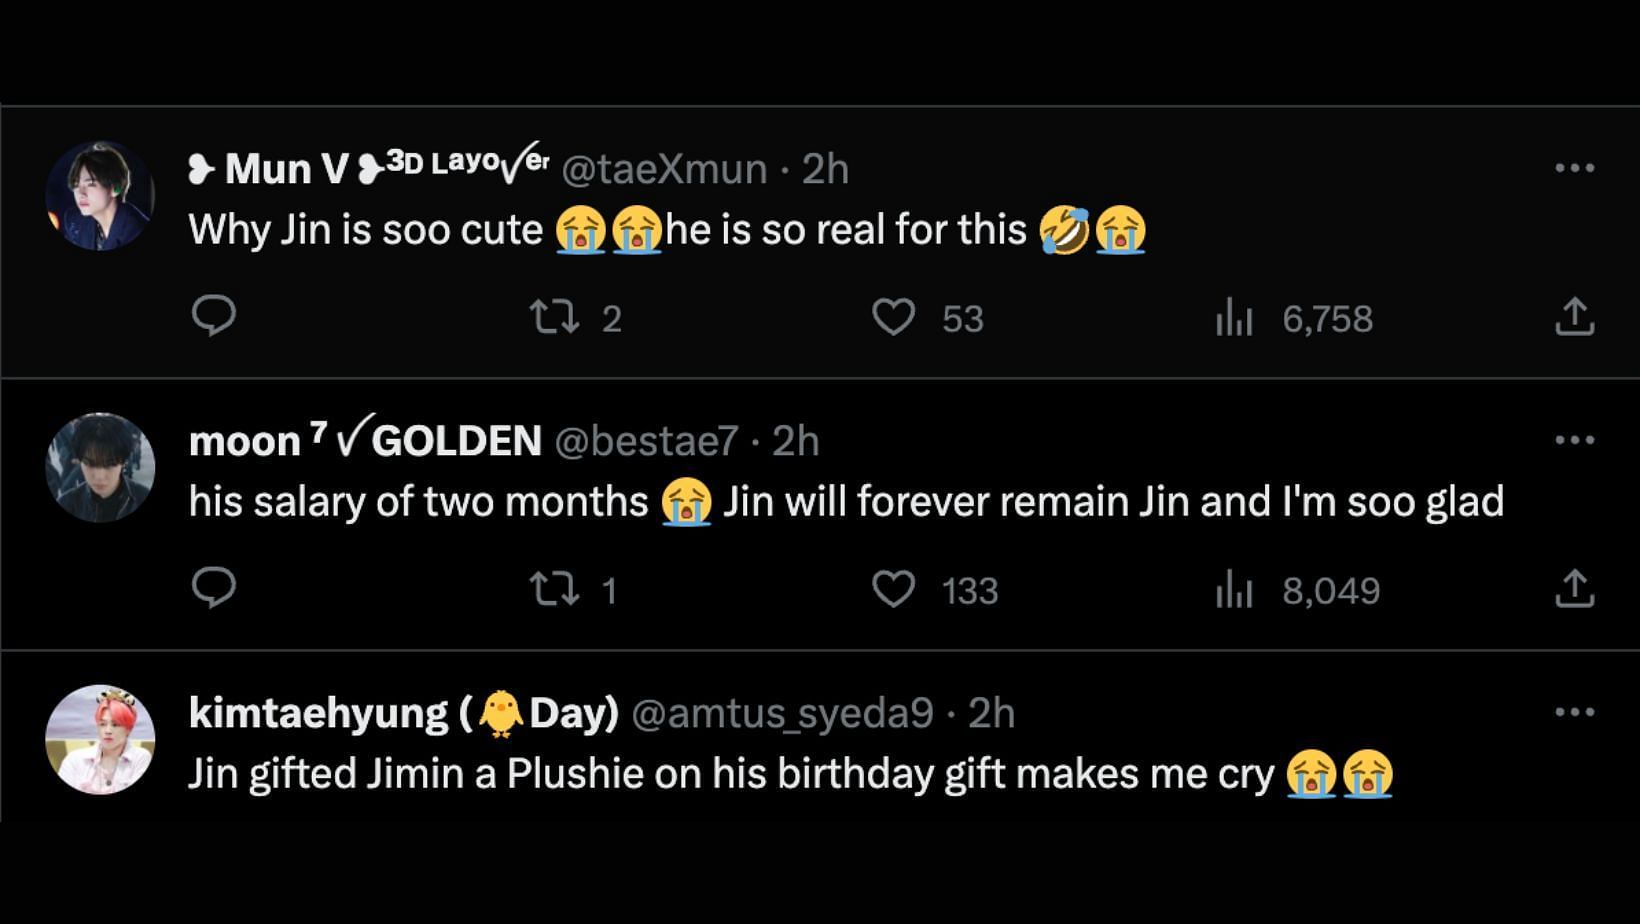 Fans react to Jin&#039;s birthday present to his younger team member. (Image via X/@taeXmun, @bestae7, @amtus_syeda9)